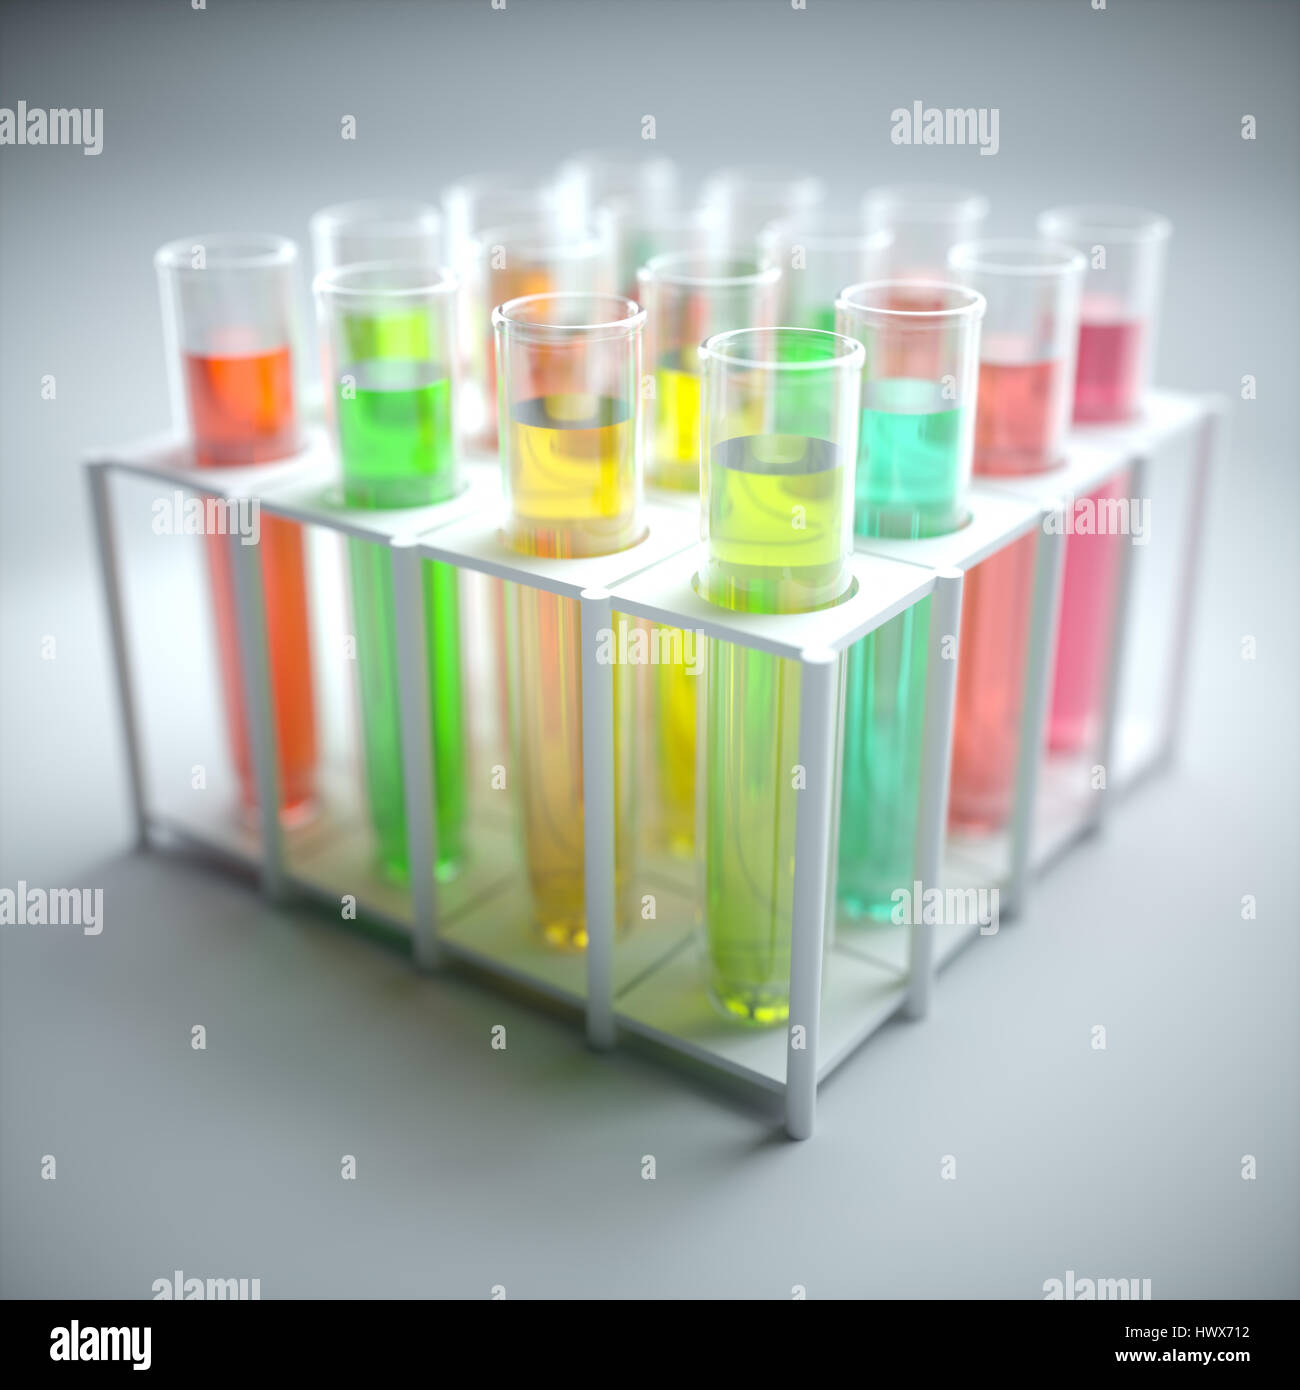 3D illustration. Test tubes with colored liquid. Stock Photo